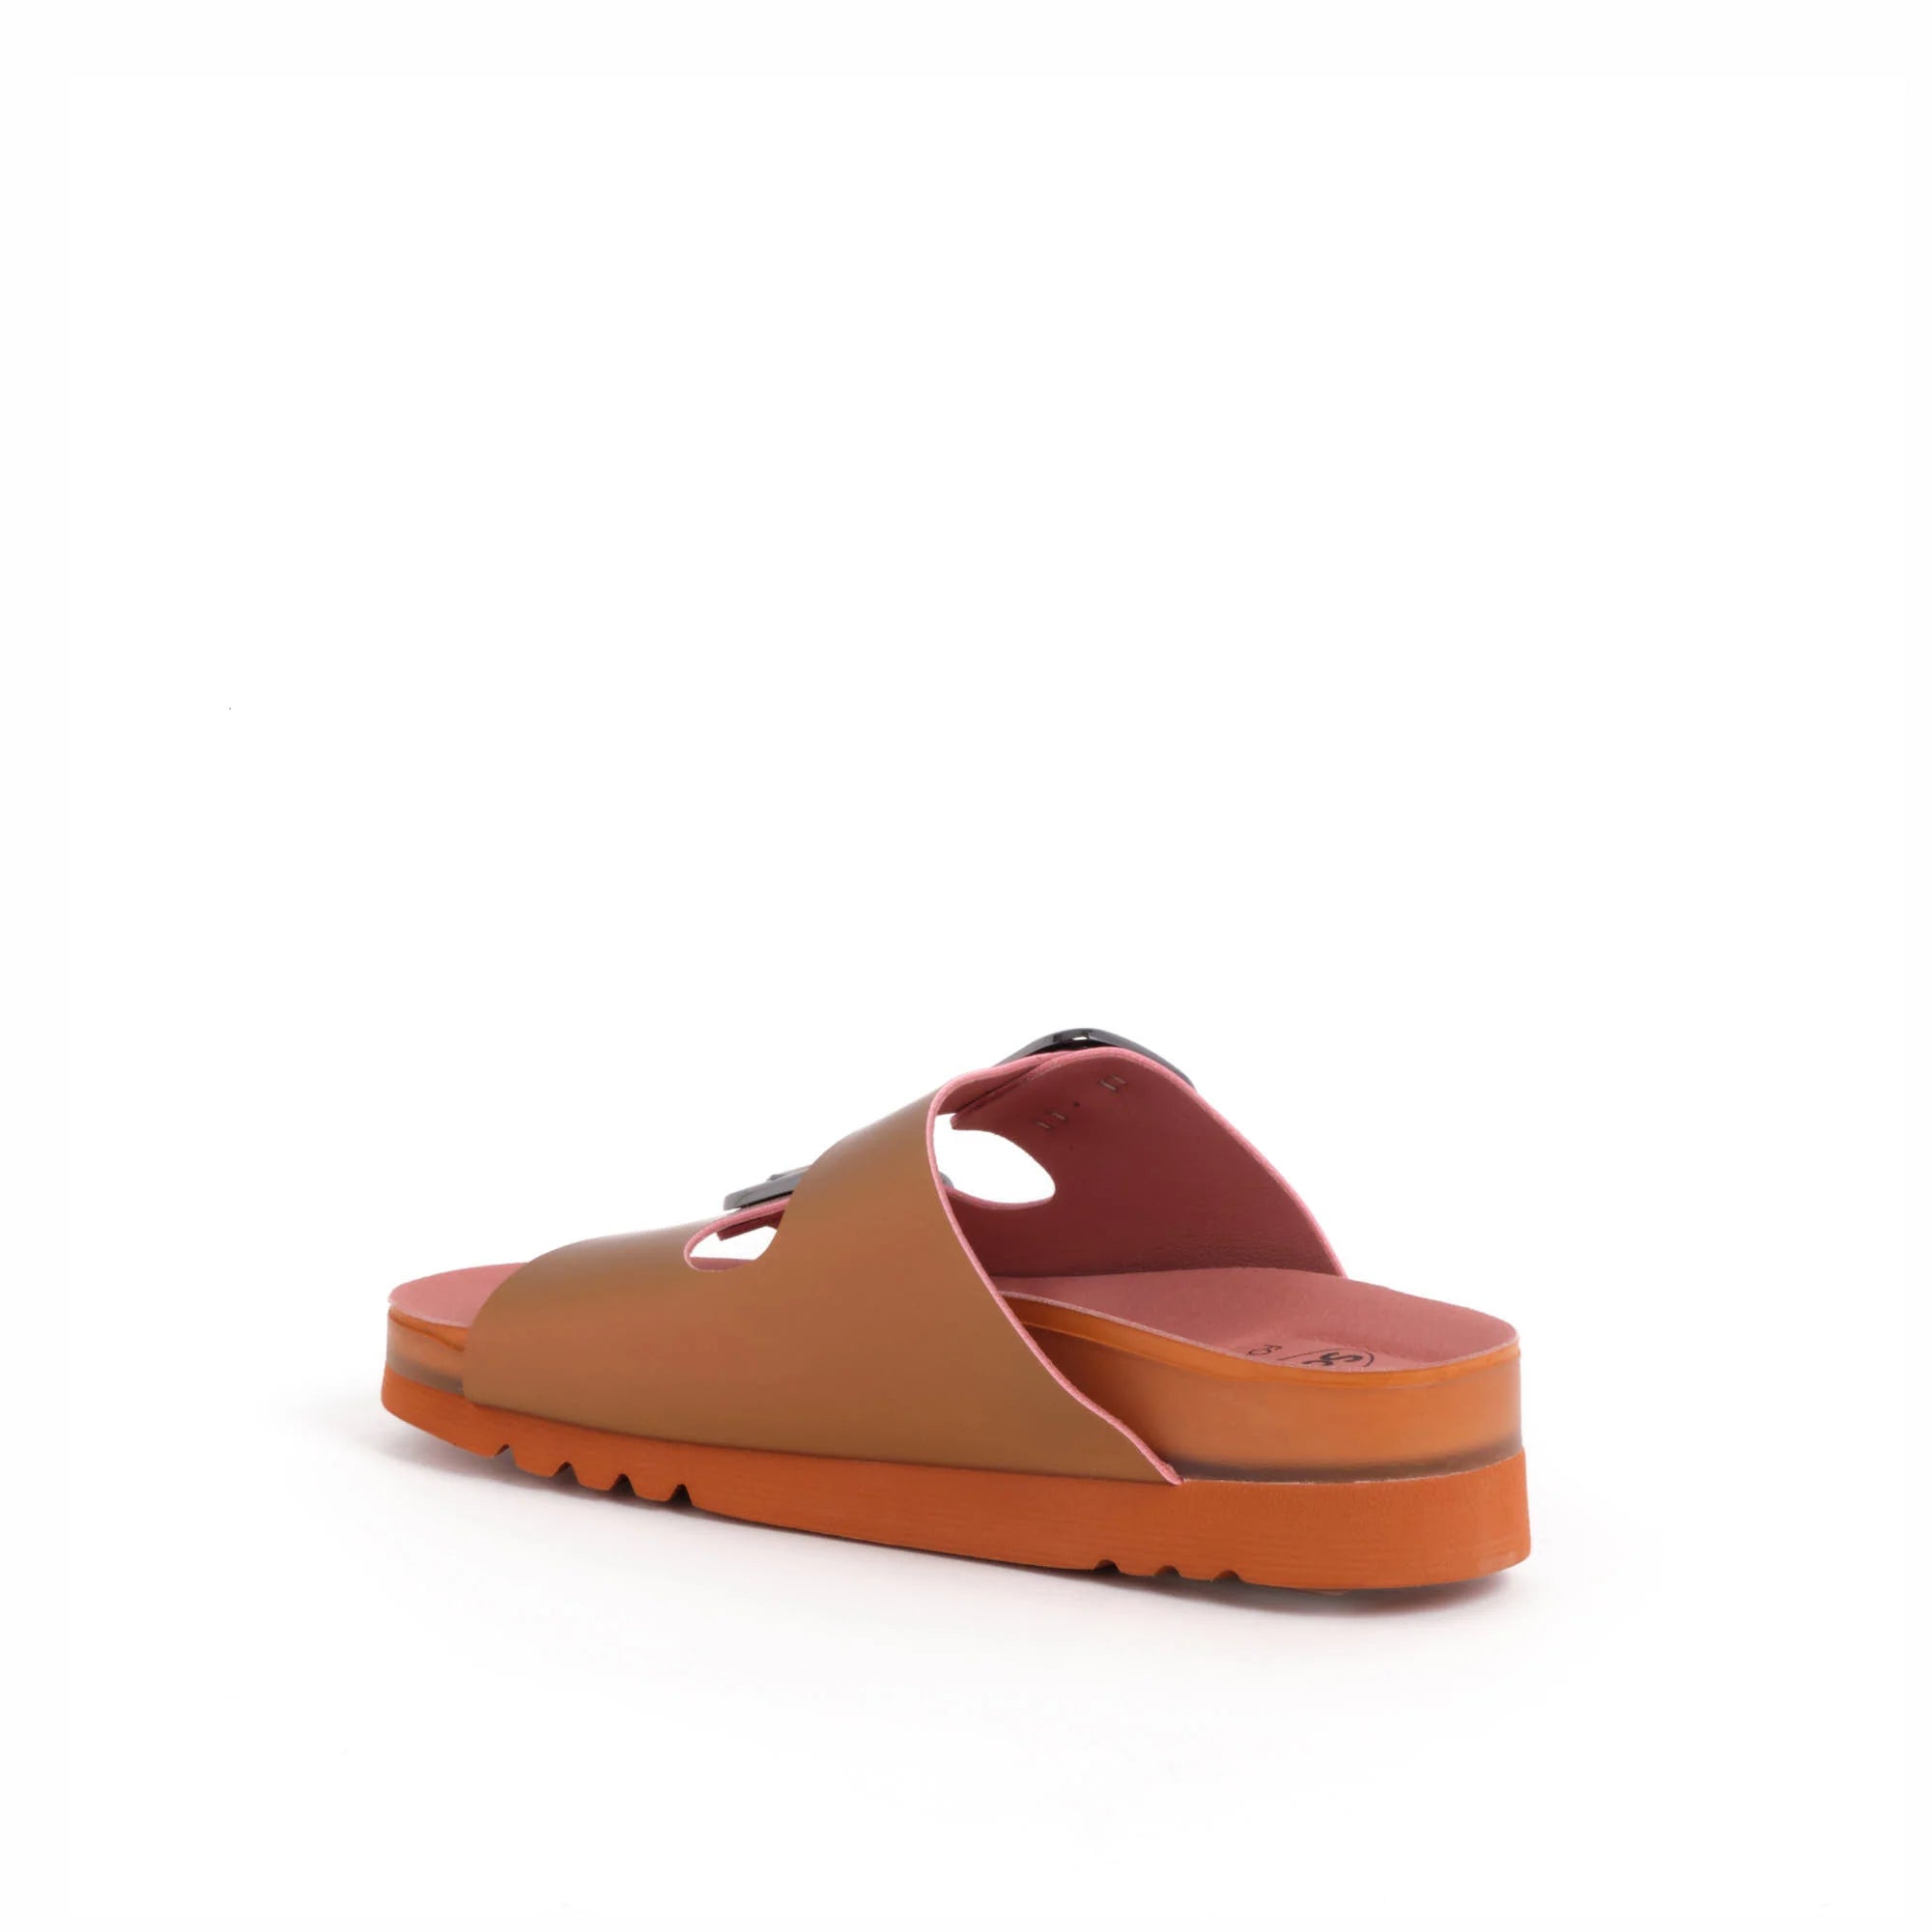 Vally Mules Synthetic Iridescent Orange N. 41 - Vally Mules Synthetic Iridescent Orange N. 41